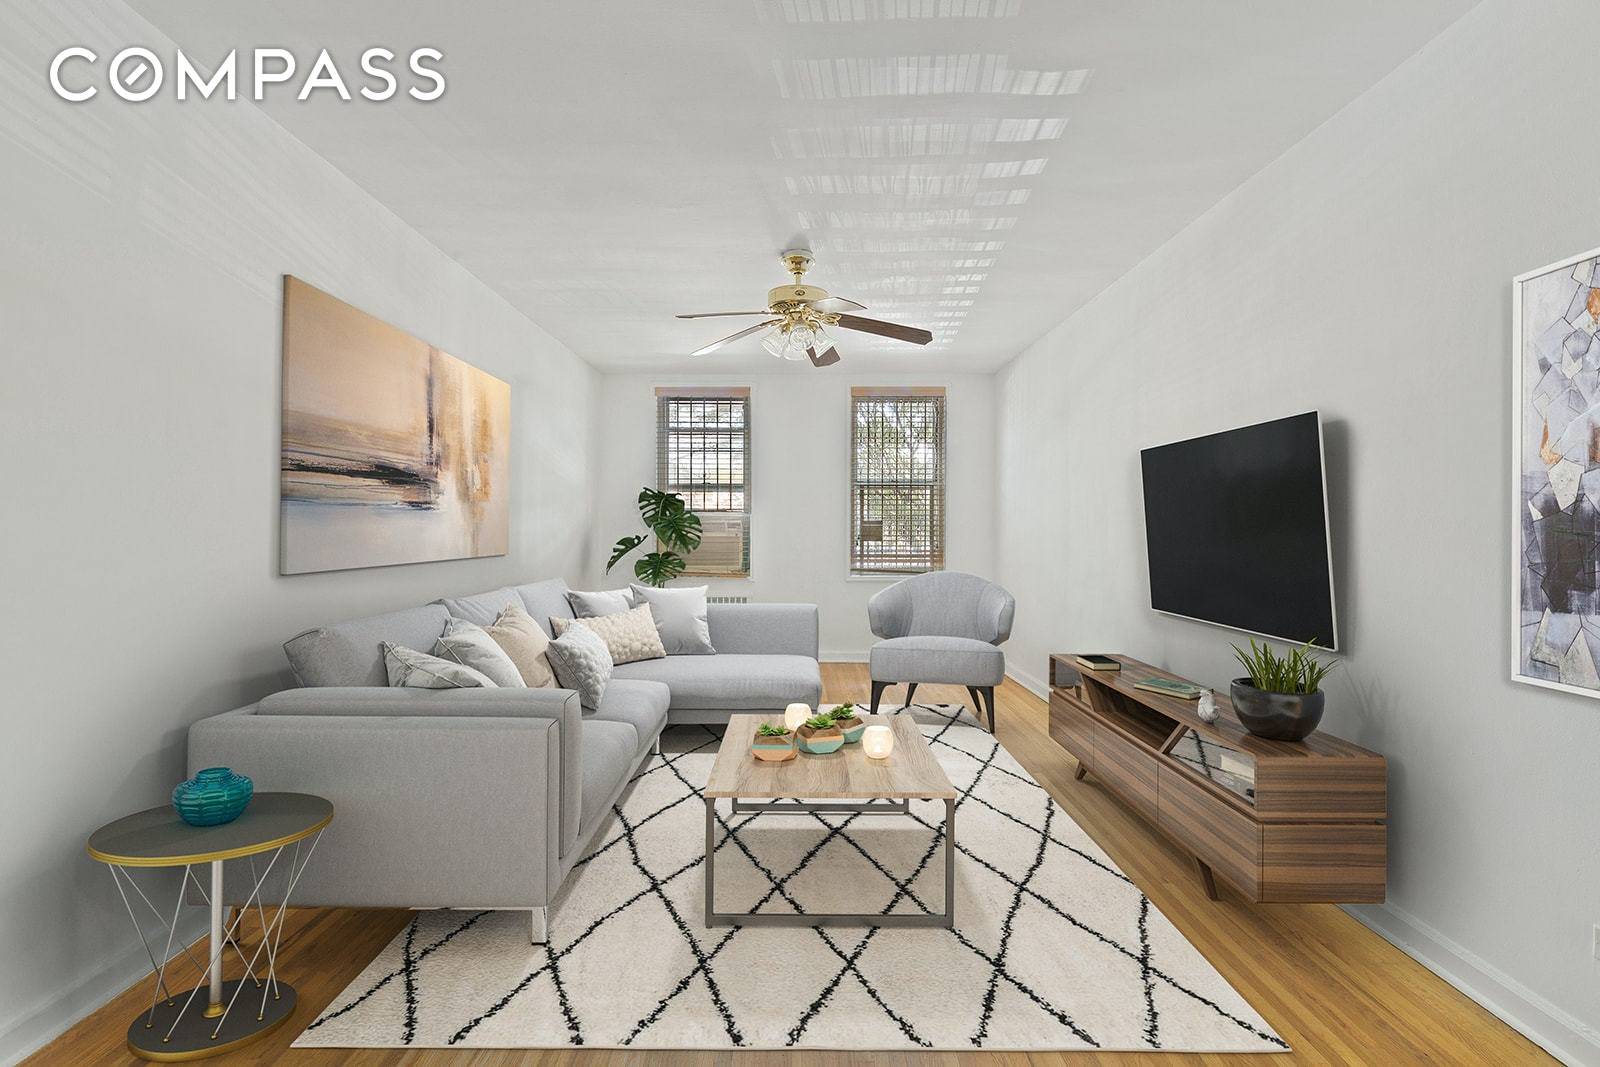 This incredibly spacious one bedroom apartment in the coveted Windsor Terrace neighborhood offers a unique opportunity to live in a well maintained elevator building with a vibrant sense of community ...